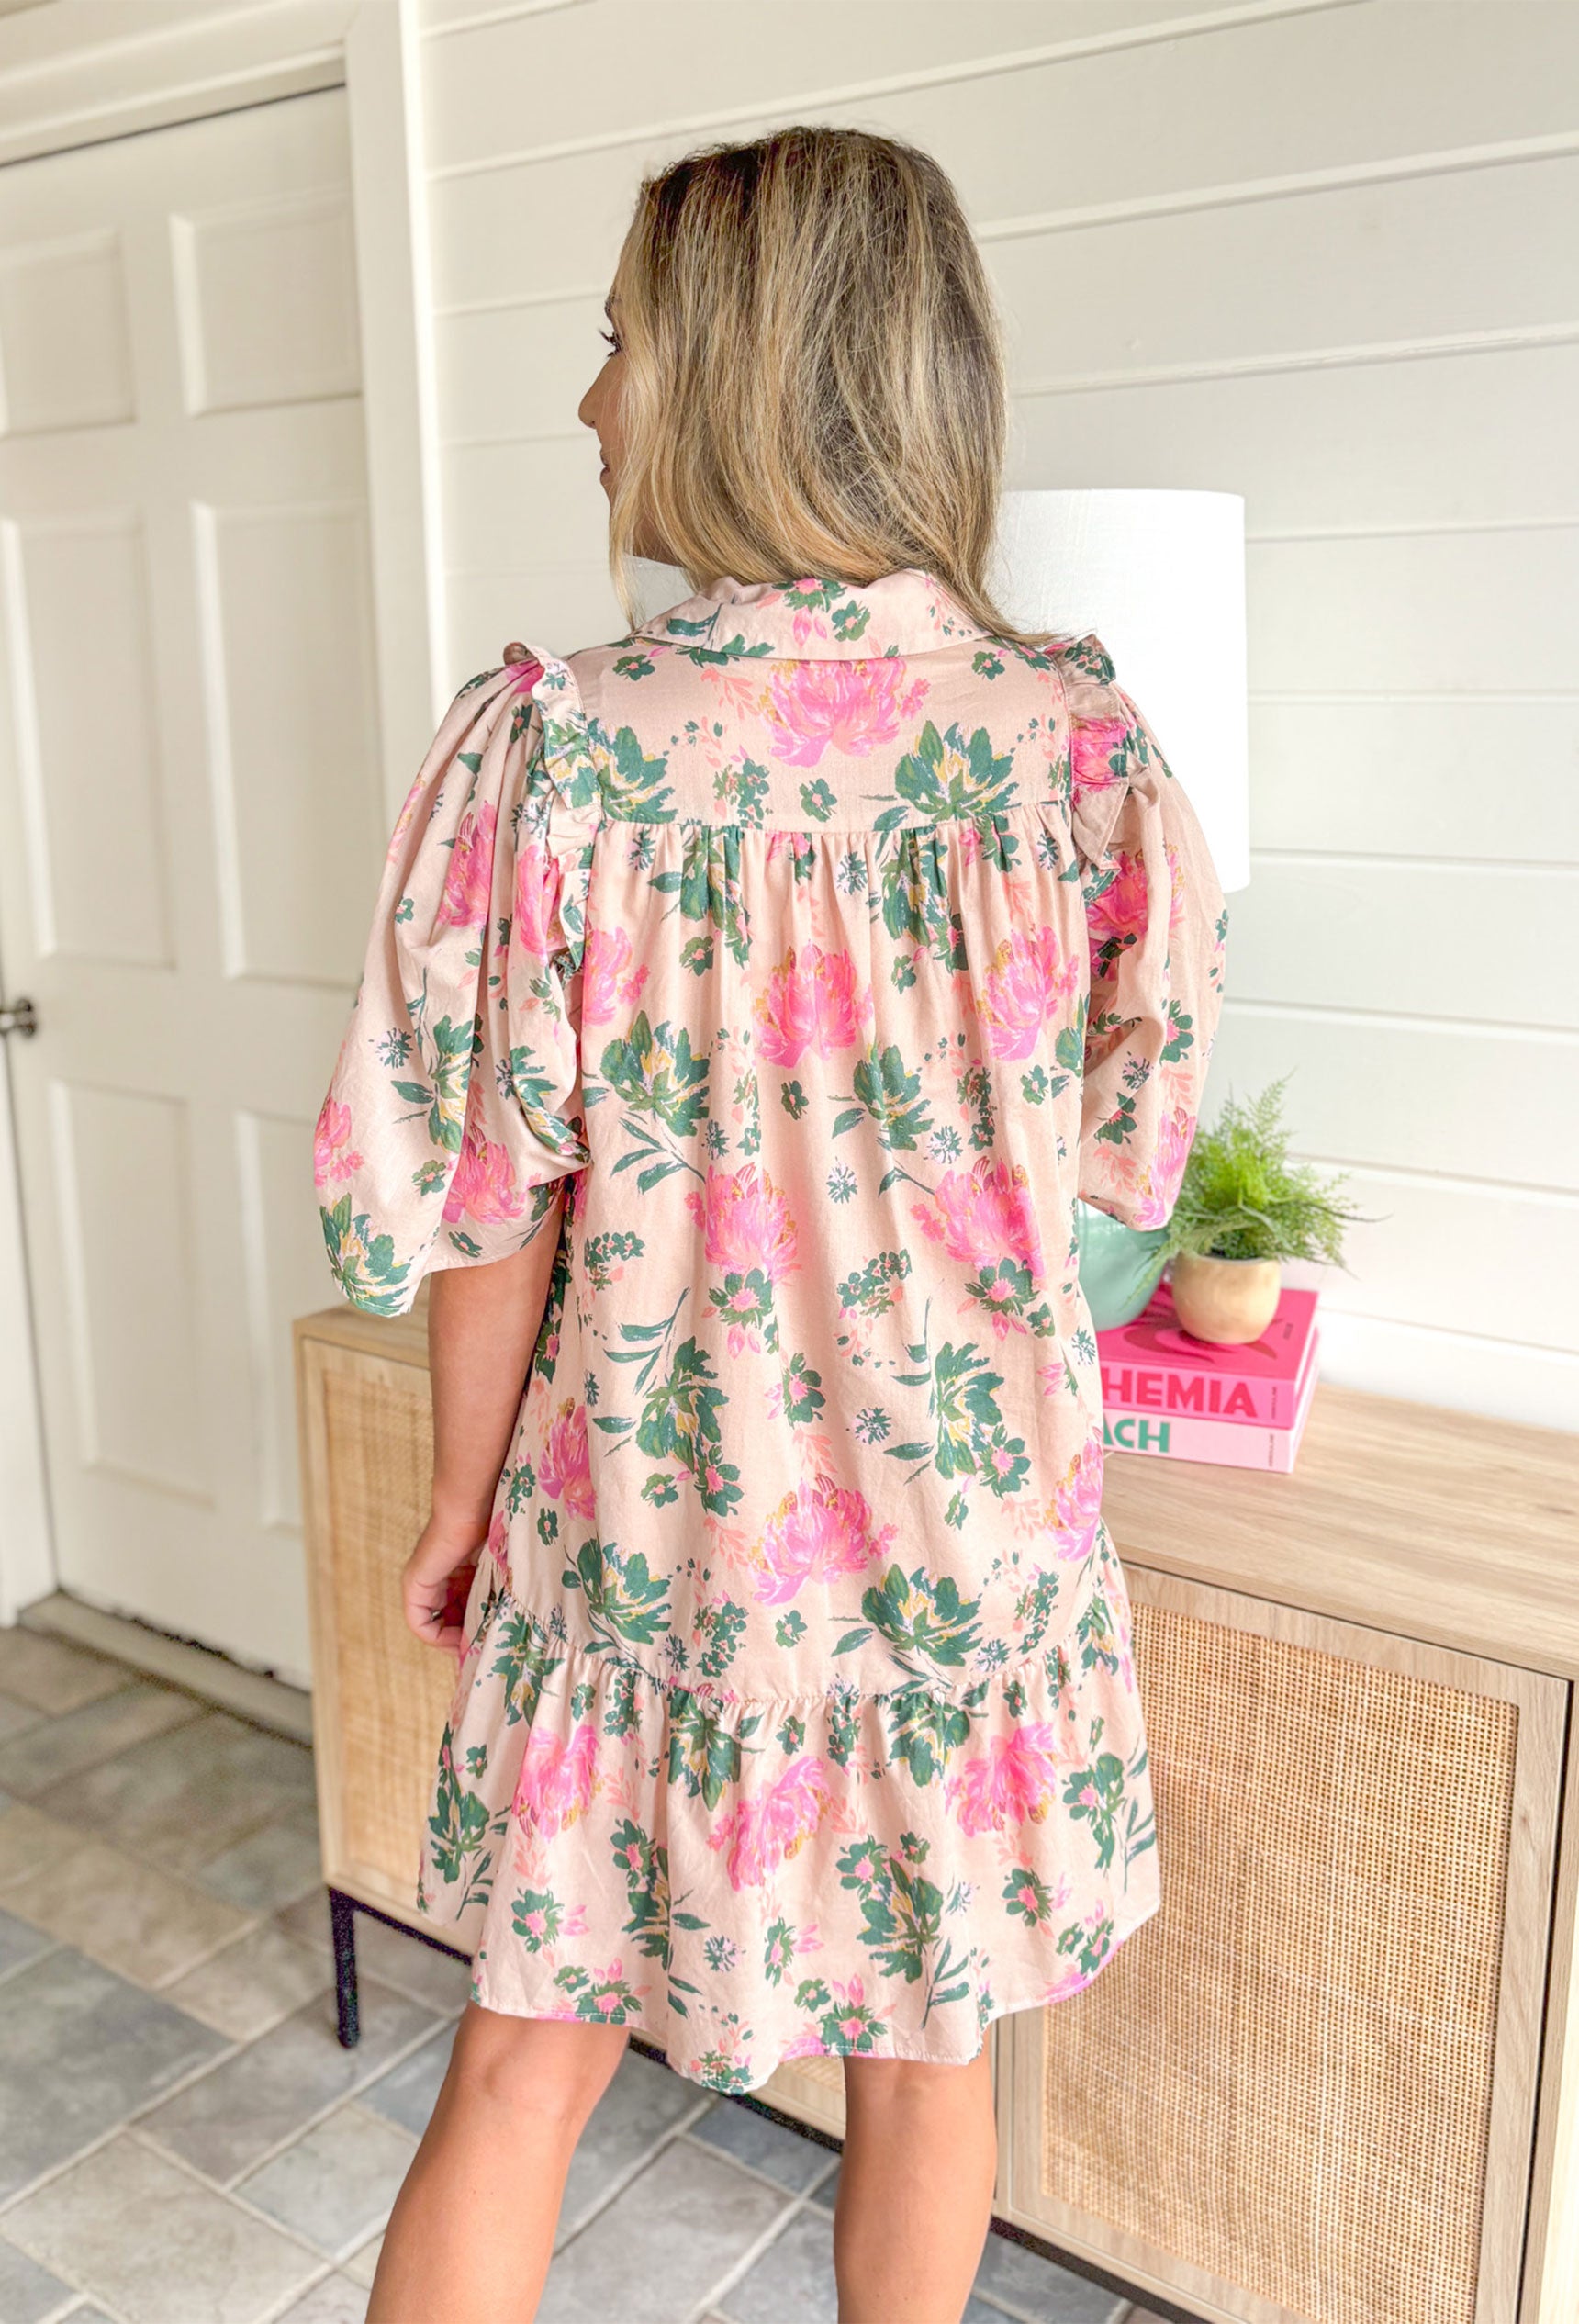 Whispered Secrets Floral Dress, blush pink short puff sleeve button down dress with collar and pink & green floral print all over the dress